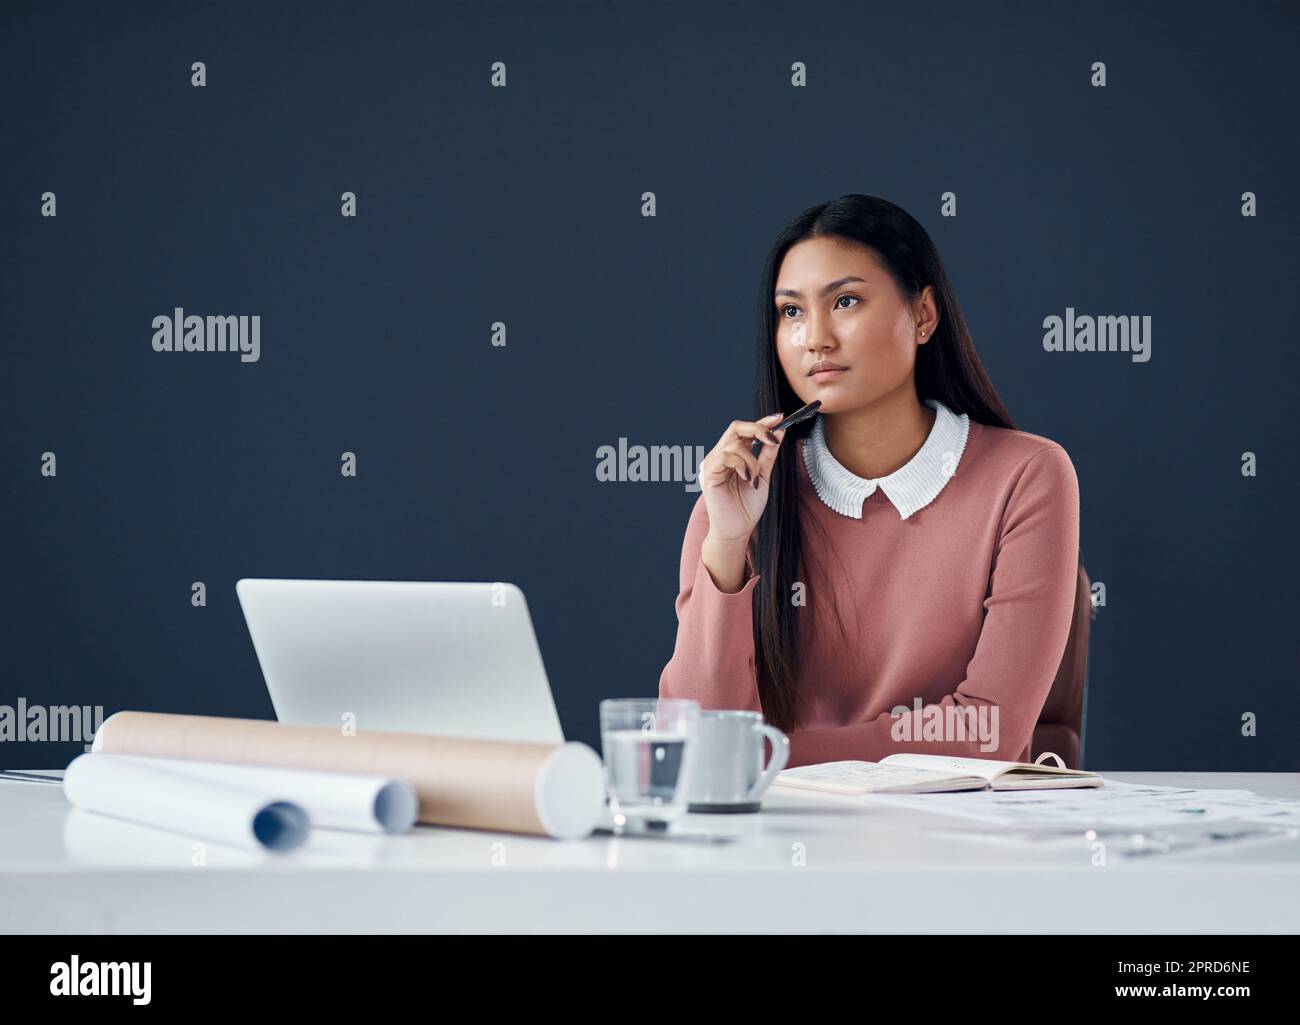 Shes got a mindful of ideas. an attractive young female architect looking thoughtful while working on a laptop in her office. Stock Photo